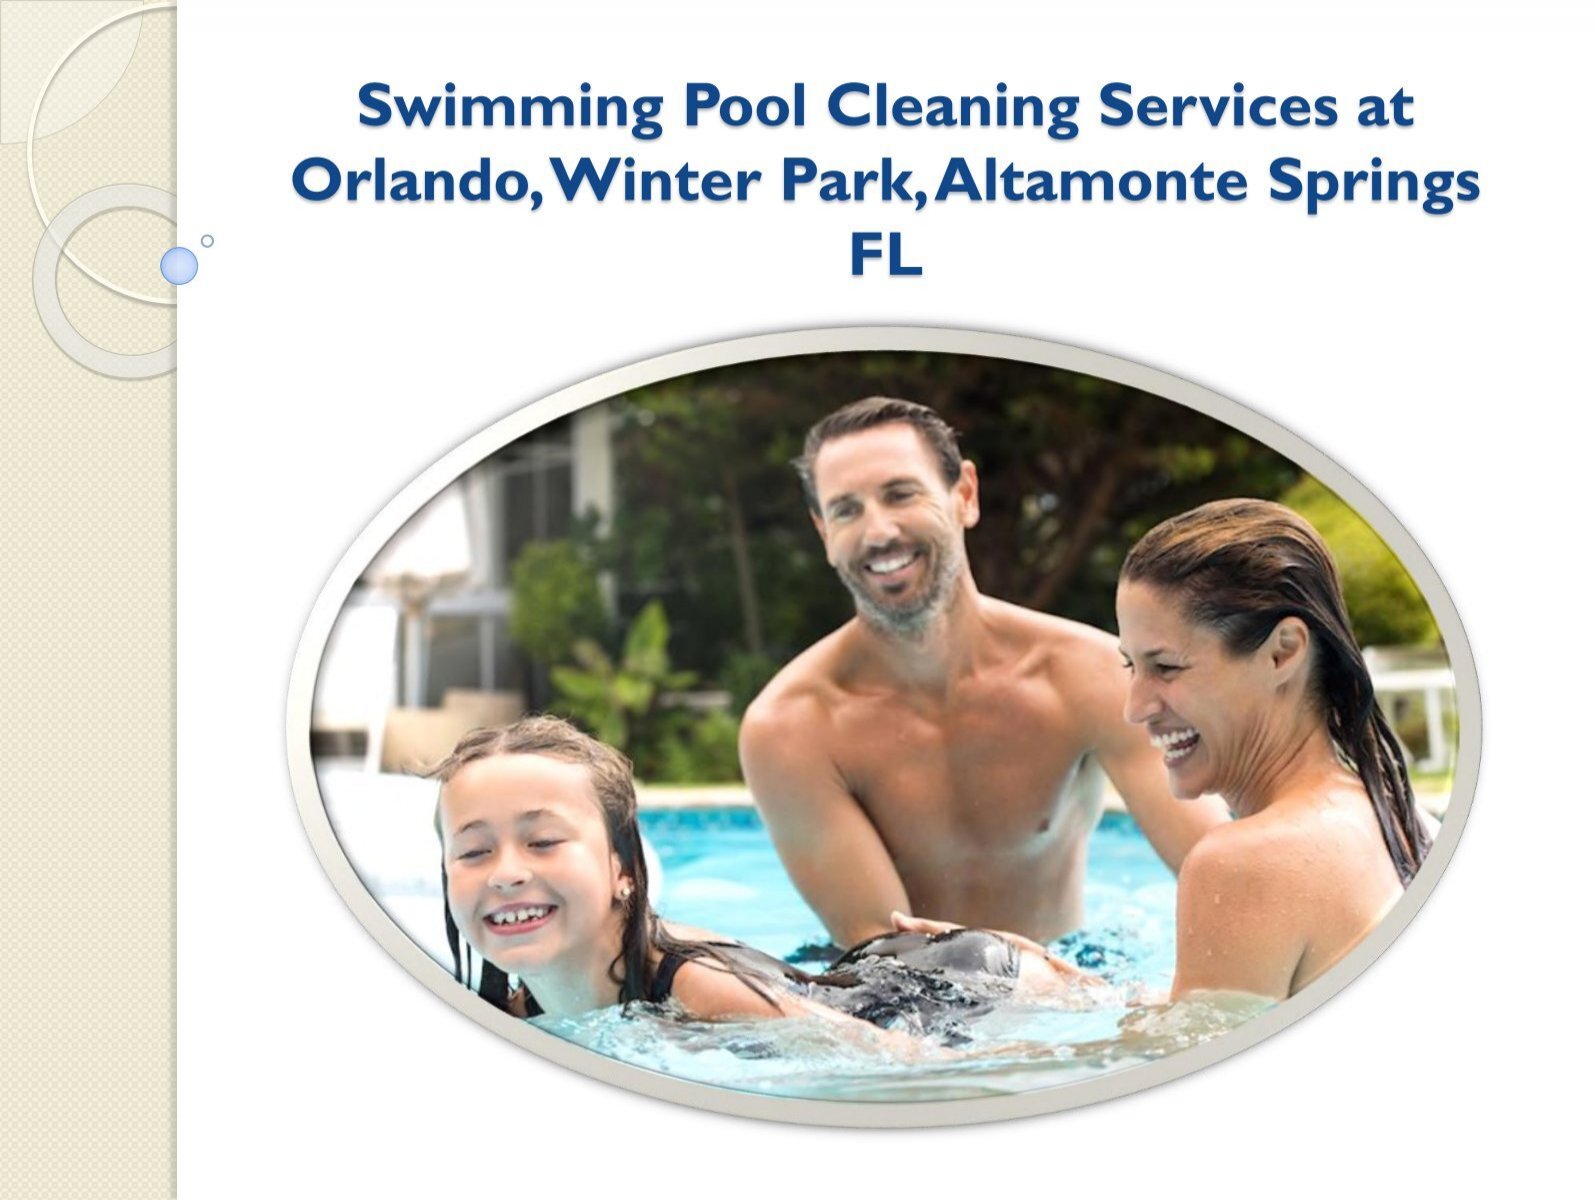 The 10 Best Swimming Pool Maintenance Services in Orlando, FL 2021